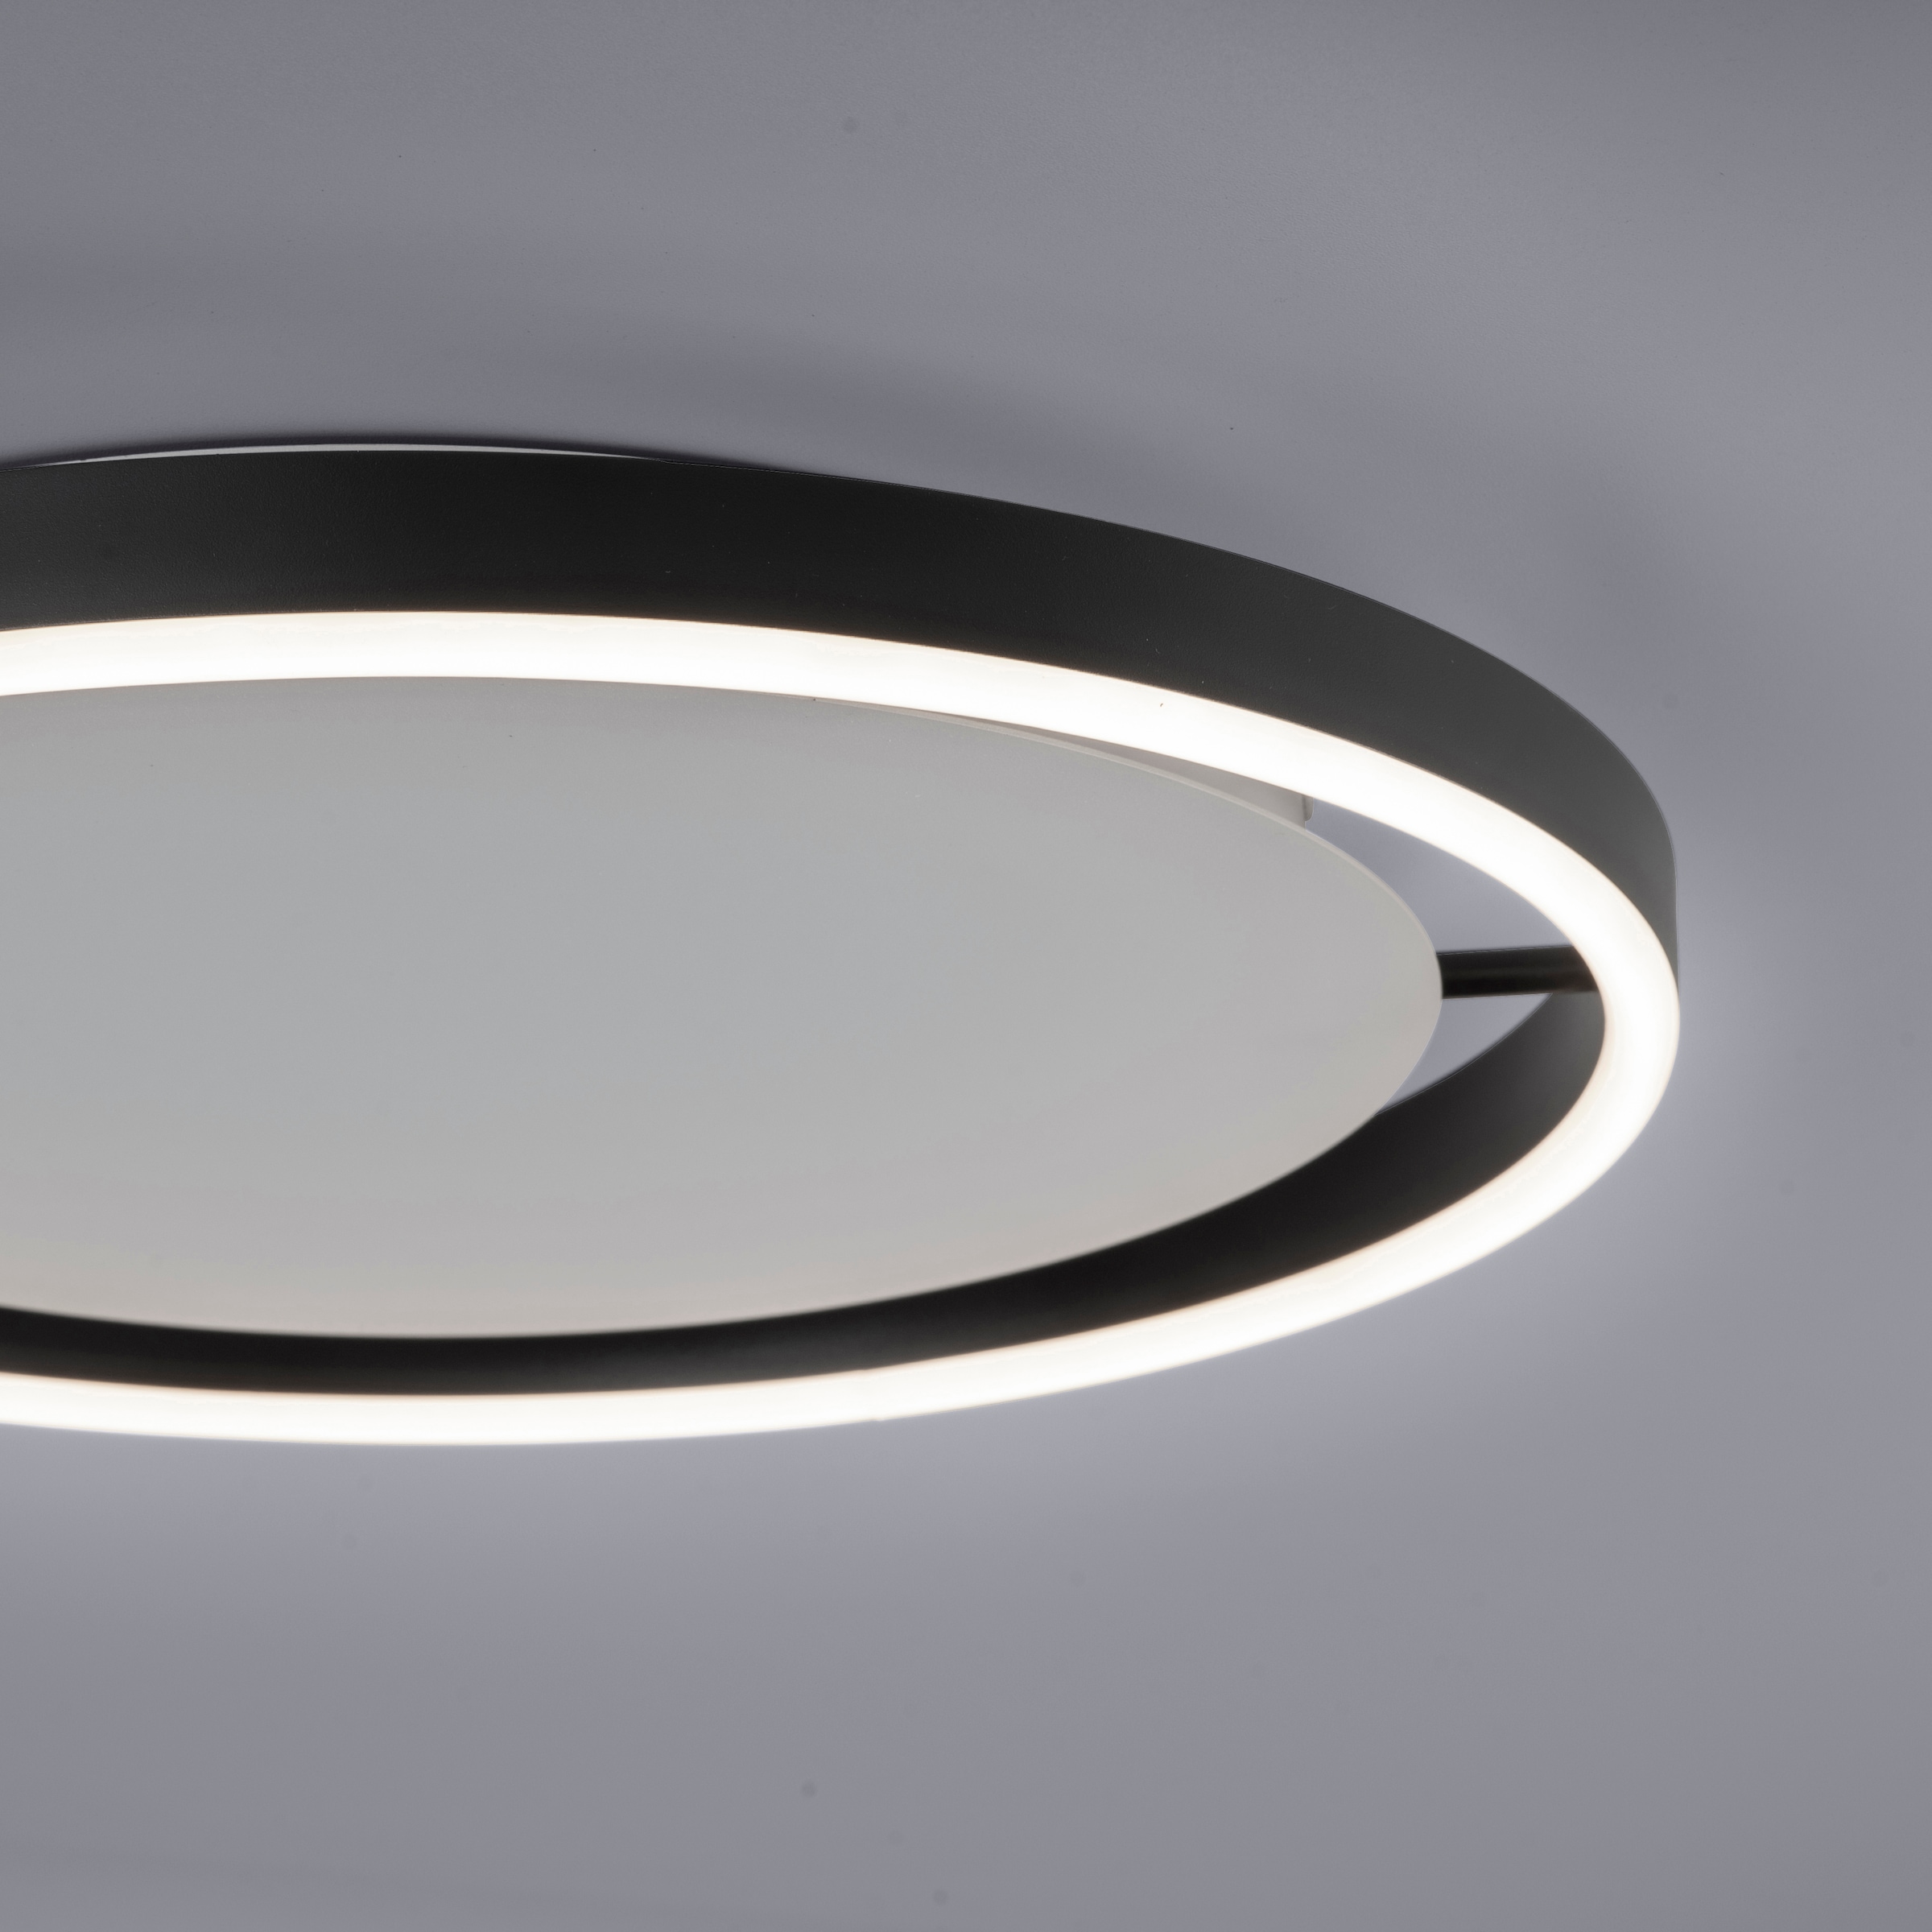 JUST LIGHT OTTO »RITUS«, Switchmo, LED, 1 dimmbar, Shop Switchmo flammig-flammig, dimmbar, Deckenleuchte im Online